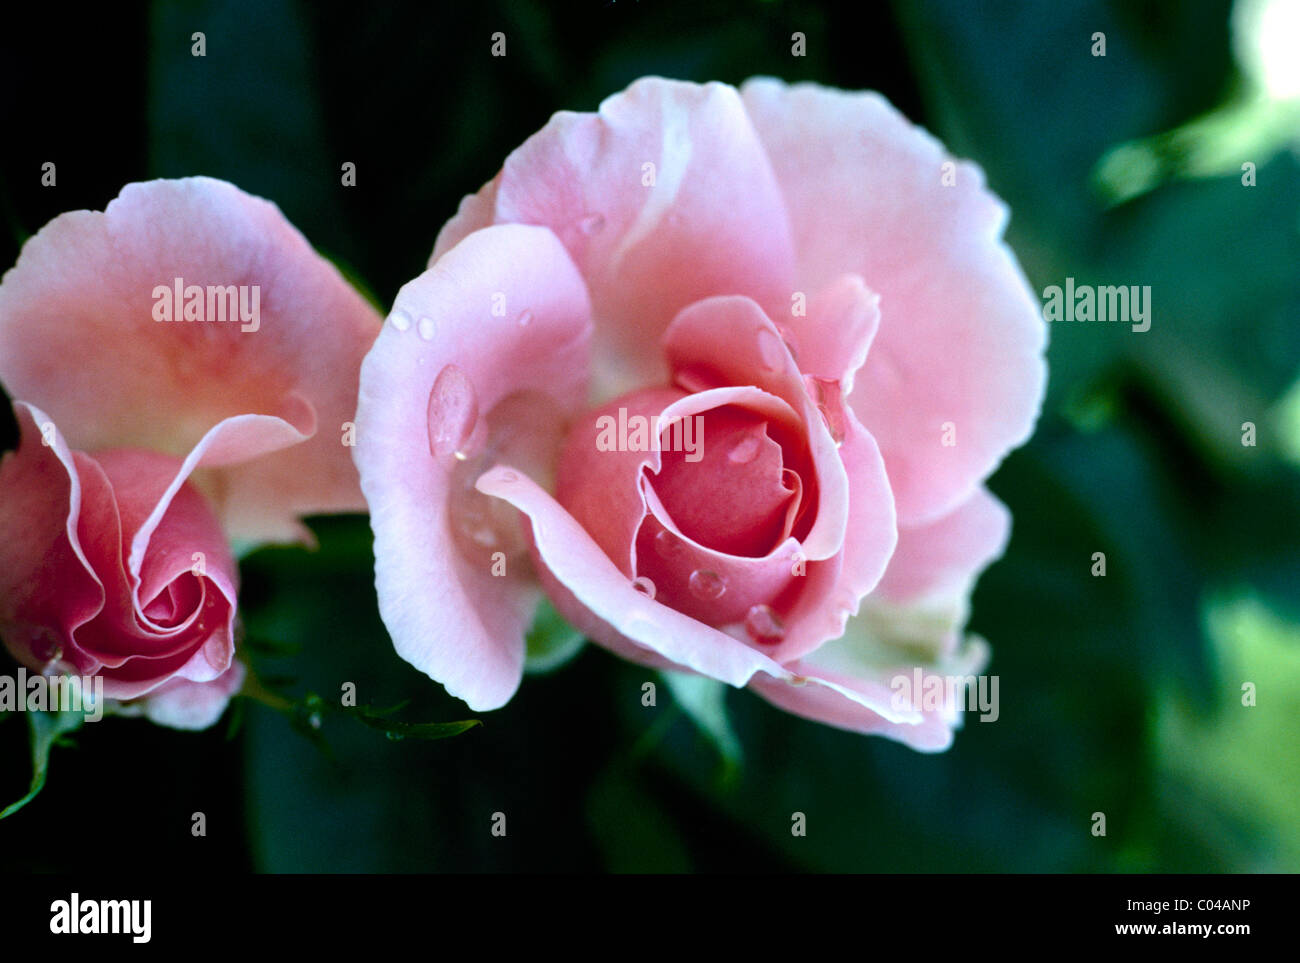 Two pink rose buds opening while covered with dew Stock Photo